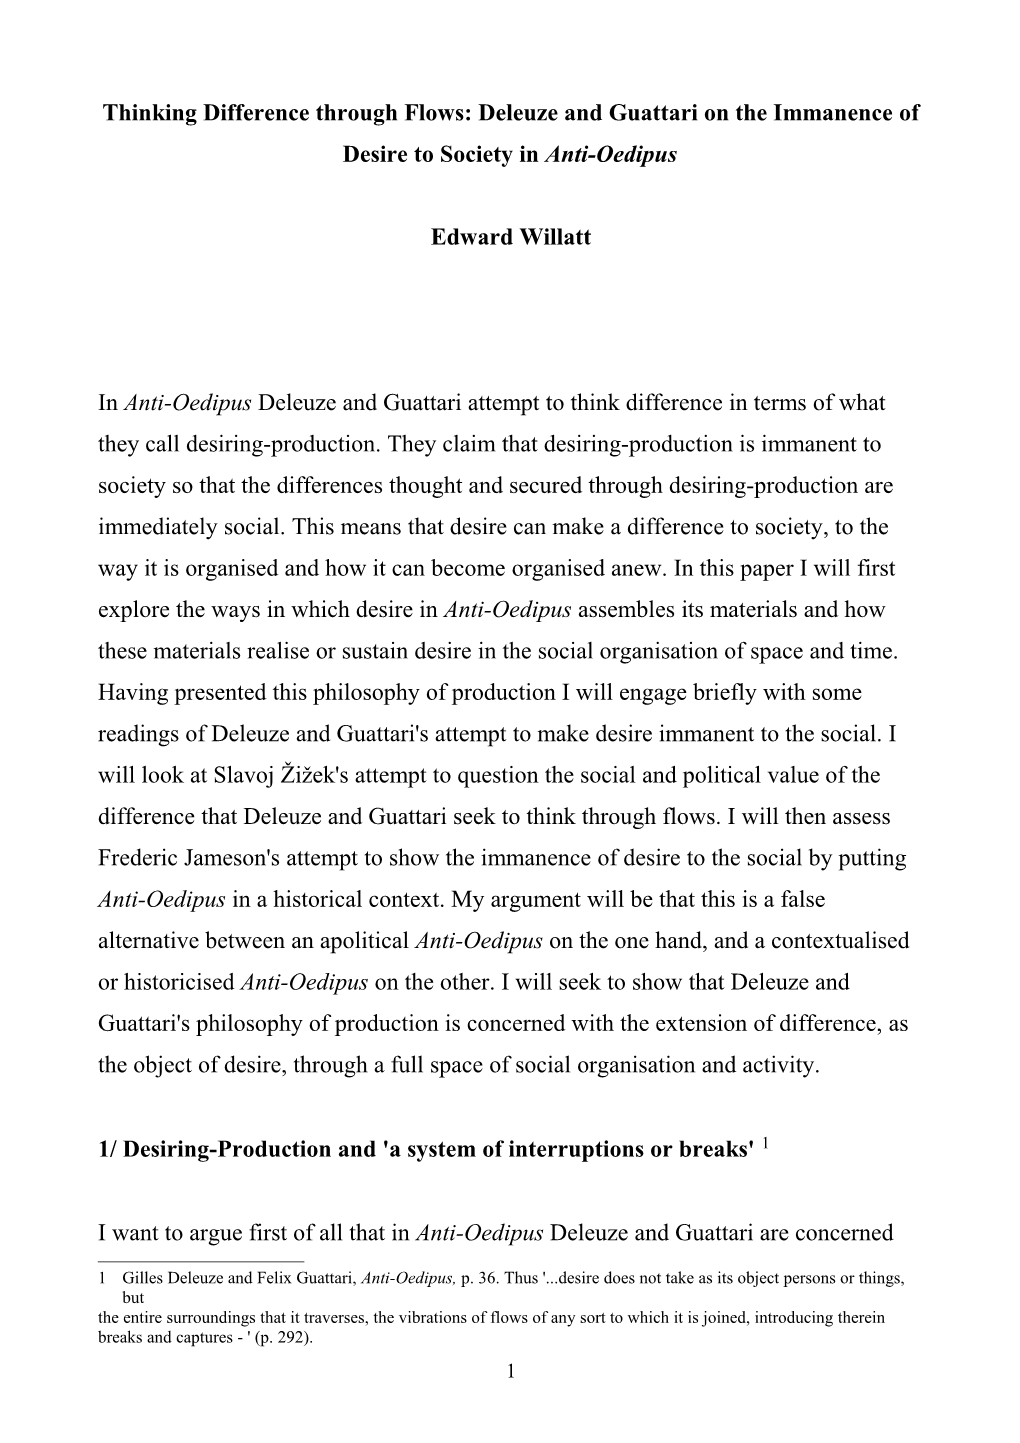 Thinking Difference Through Flows: Deleuze and Guattari on the Immanence of Desire to Society